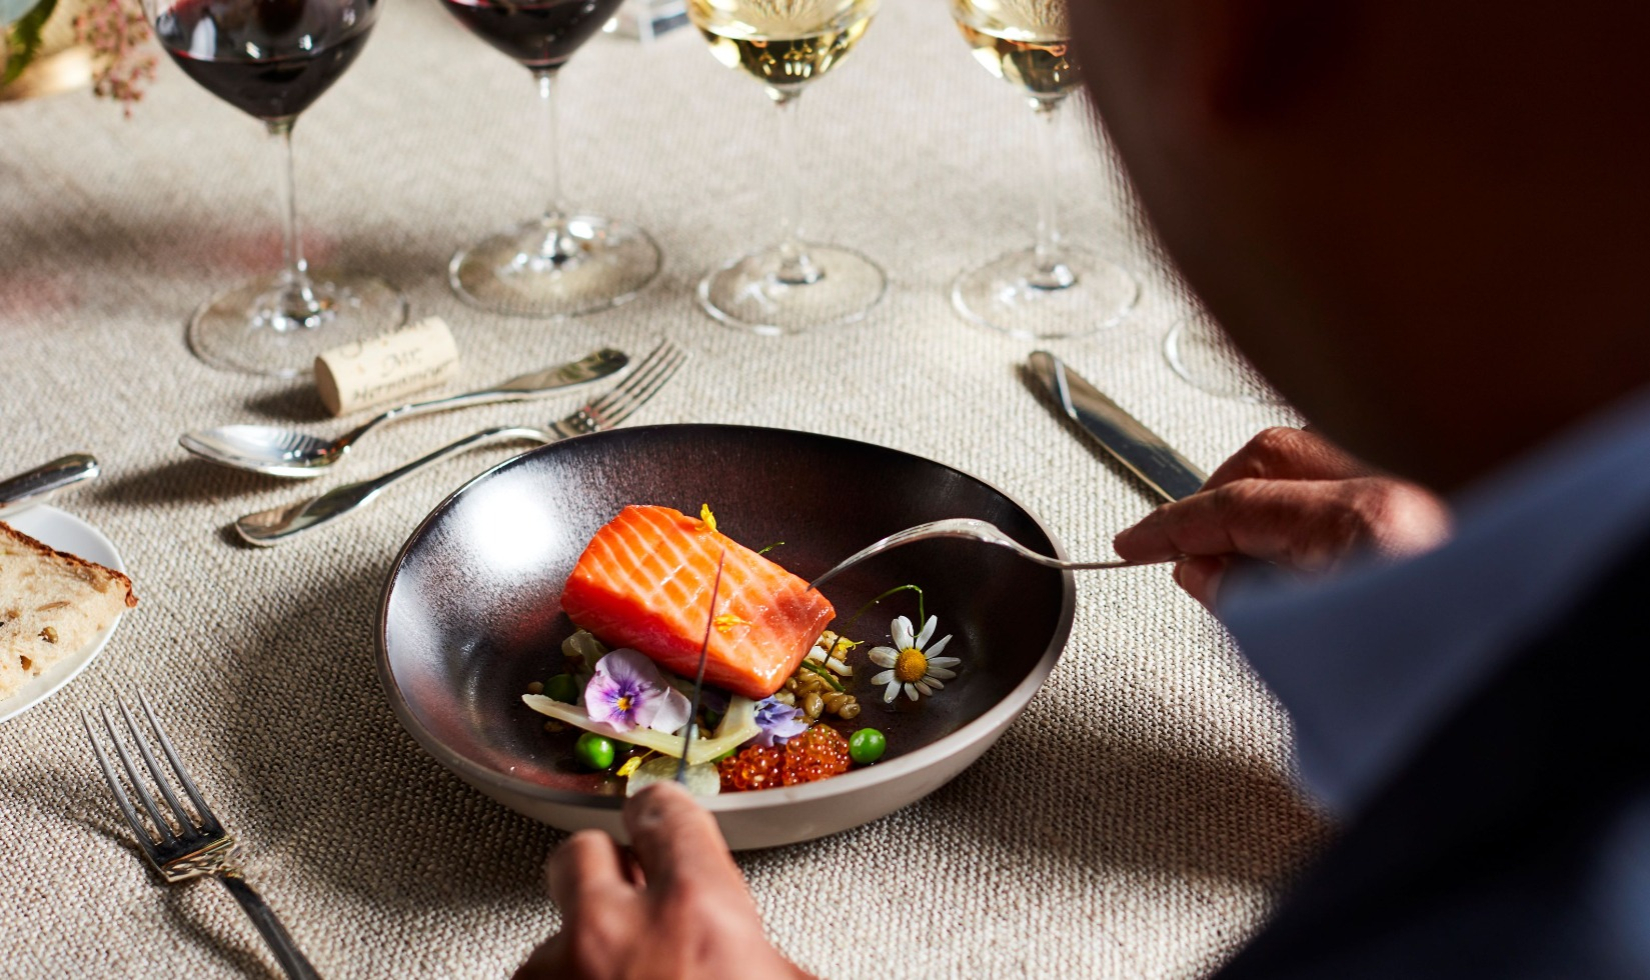 Salmon dish at formal table setting in the Jordan Dining Room